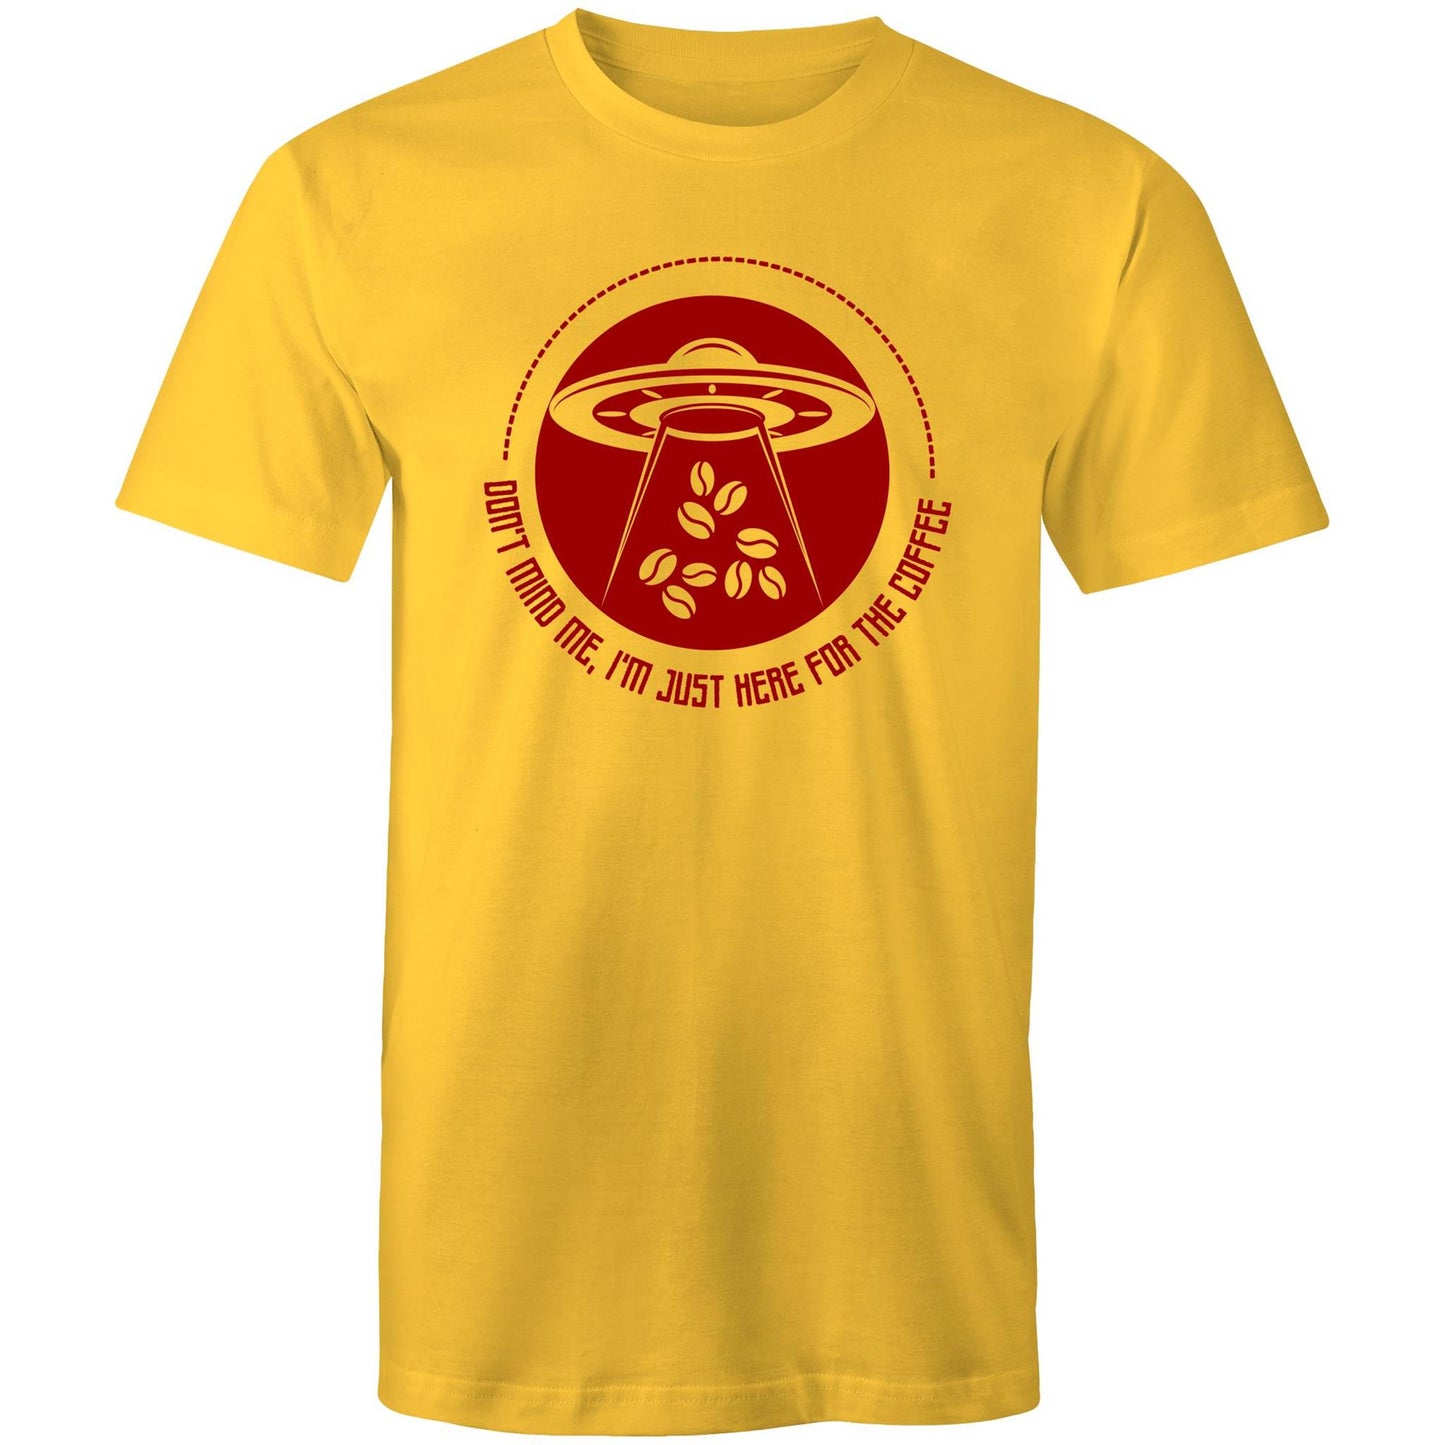 Don't Mind Me, I'm Just Here For The Coffee, Alien UFO - Mens T-Shirt Yellow Mens T-shirt Coffee Sci Fi